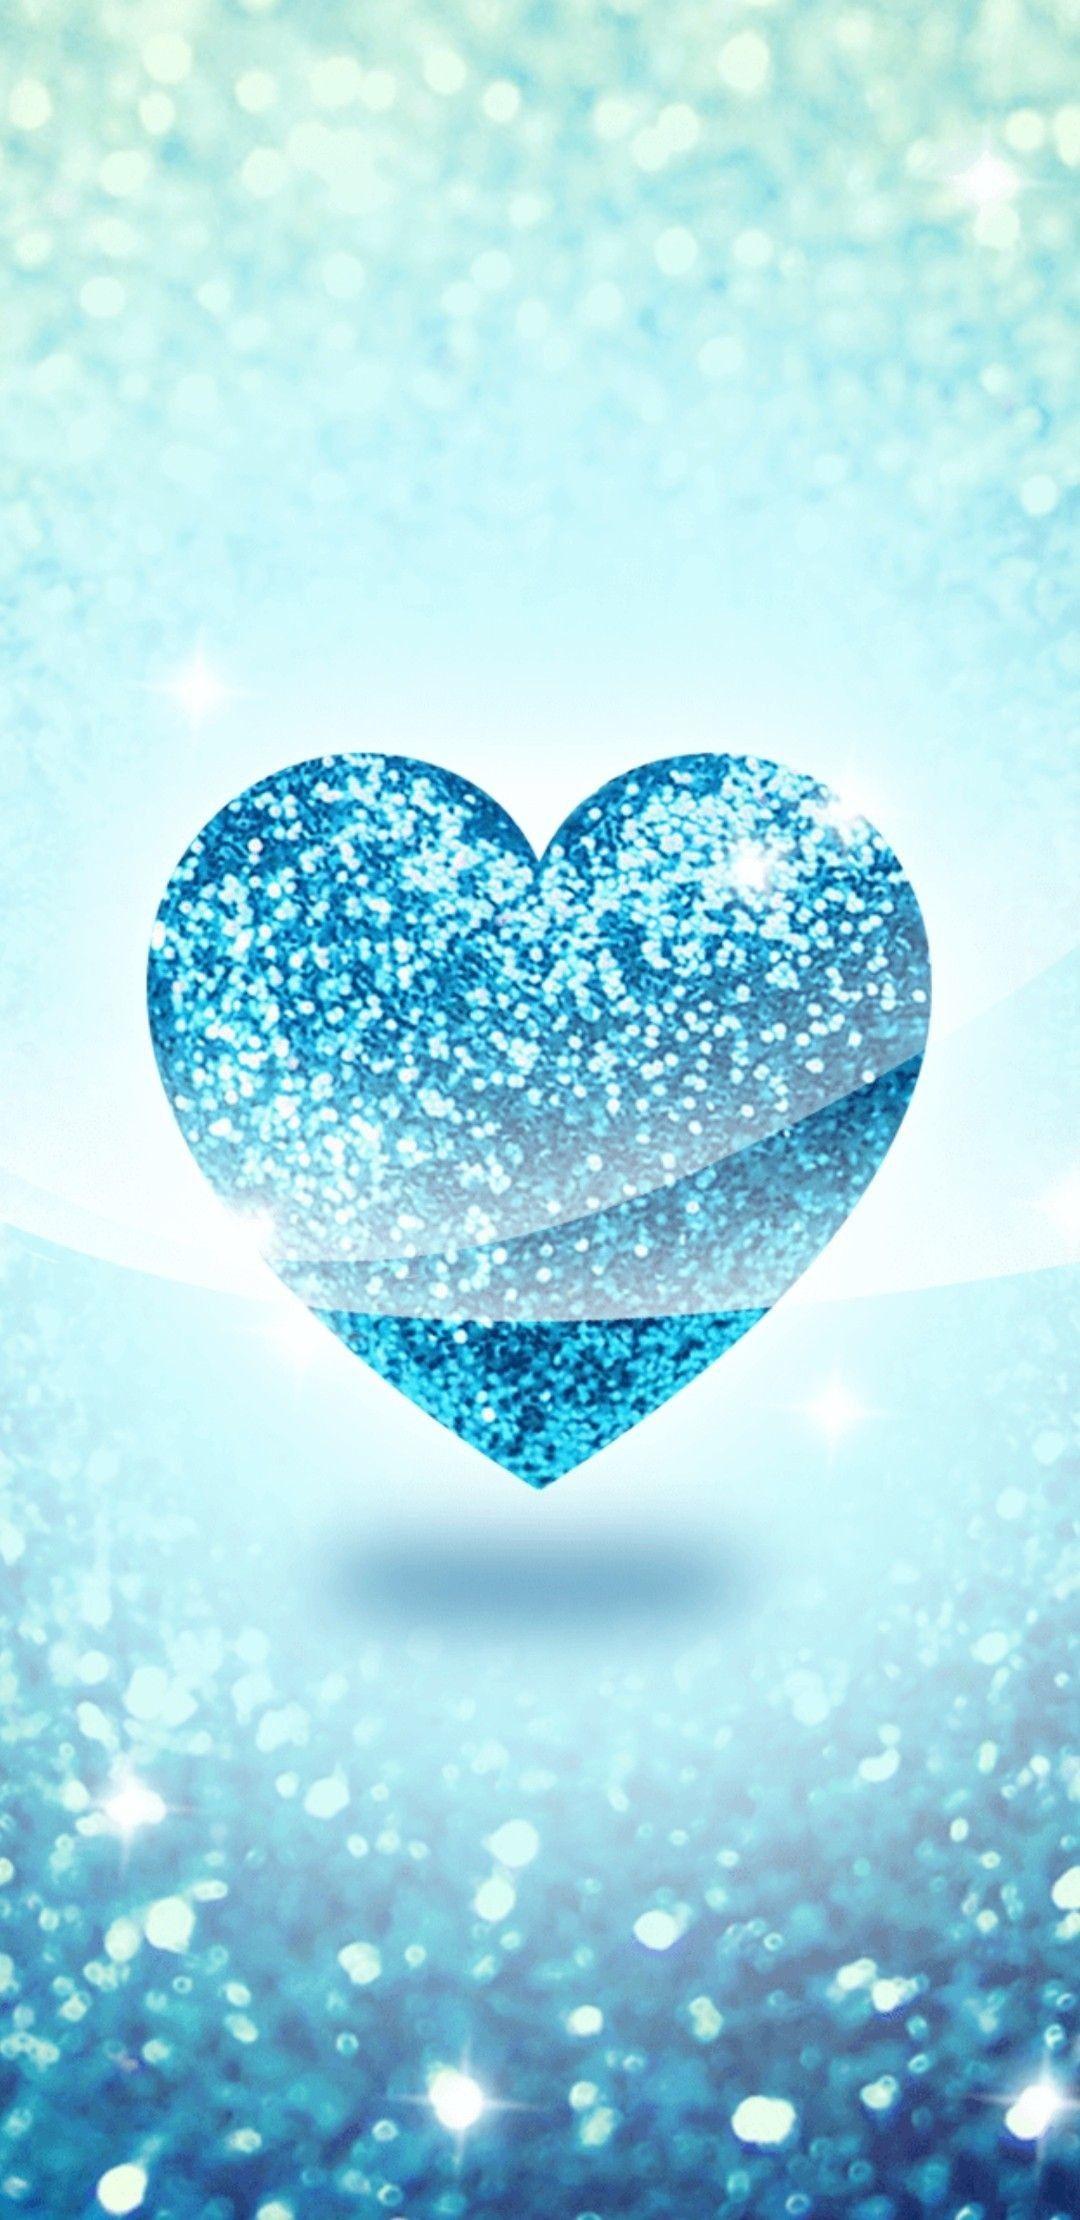 Mint Green Hearts Wallpapers - Top Free Mint Green Hearts Backgrounds